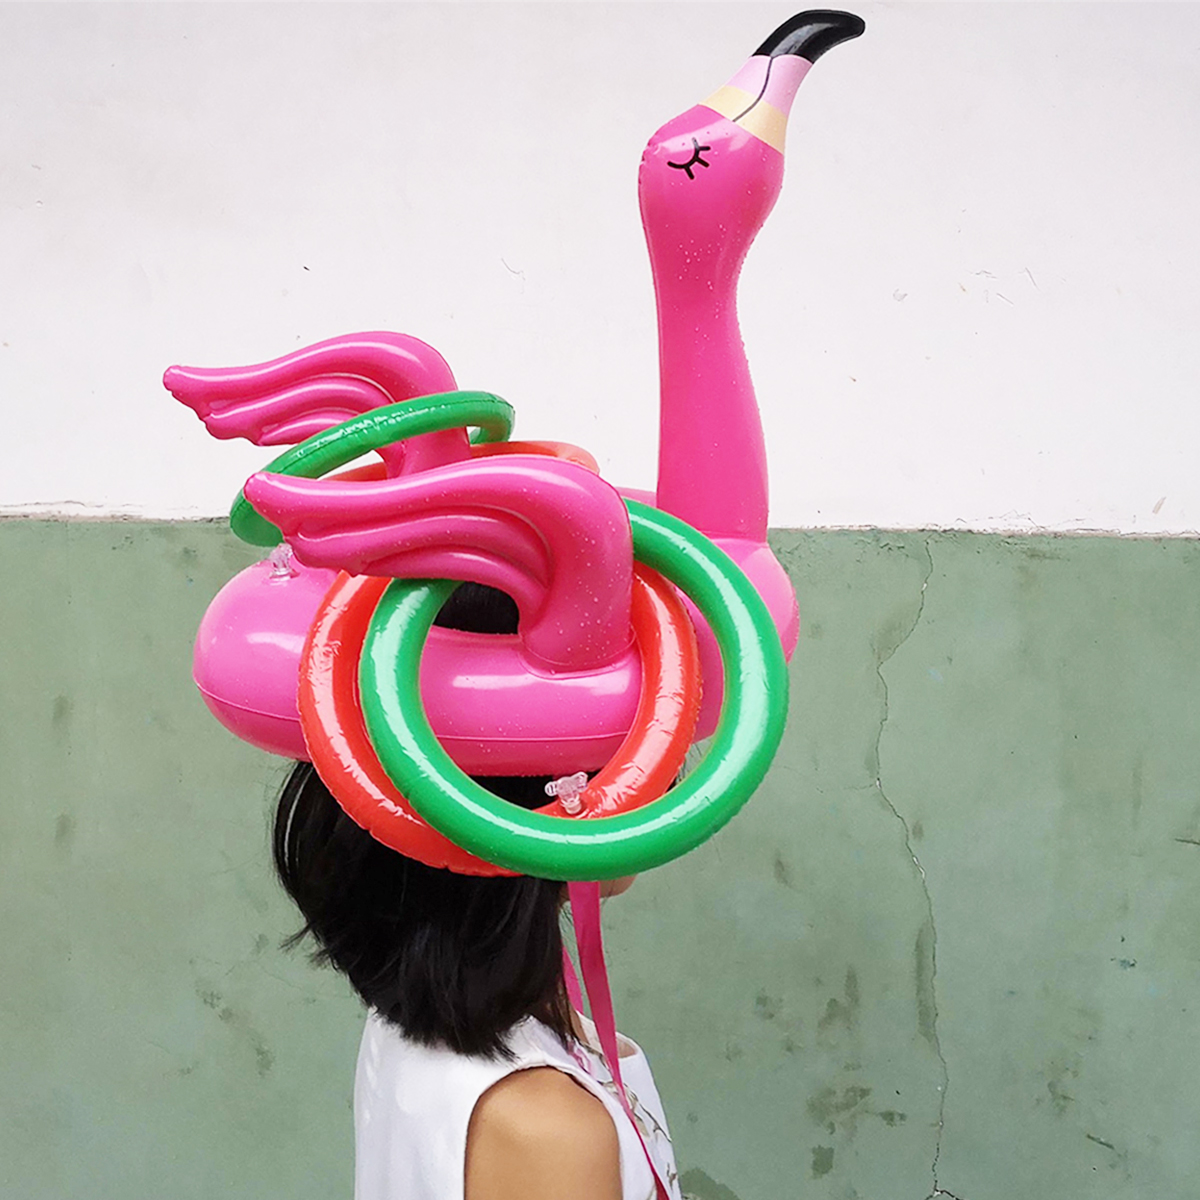 Inflatable-Flamingo-Ring-Toss-Game-For-Family-Party-Pool-Garden-Throwing-Toys-1626091-8